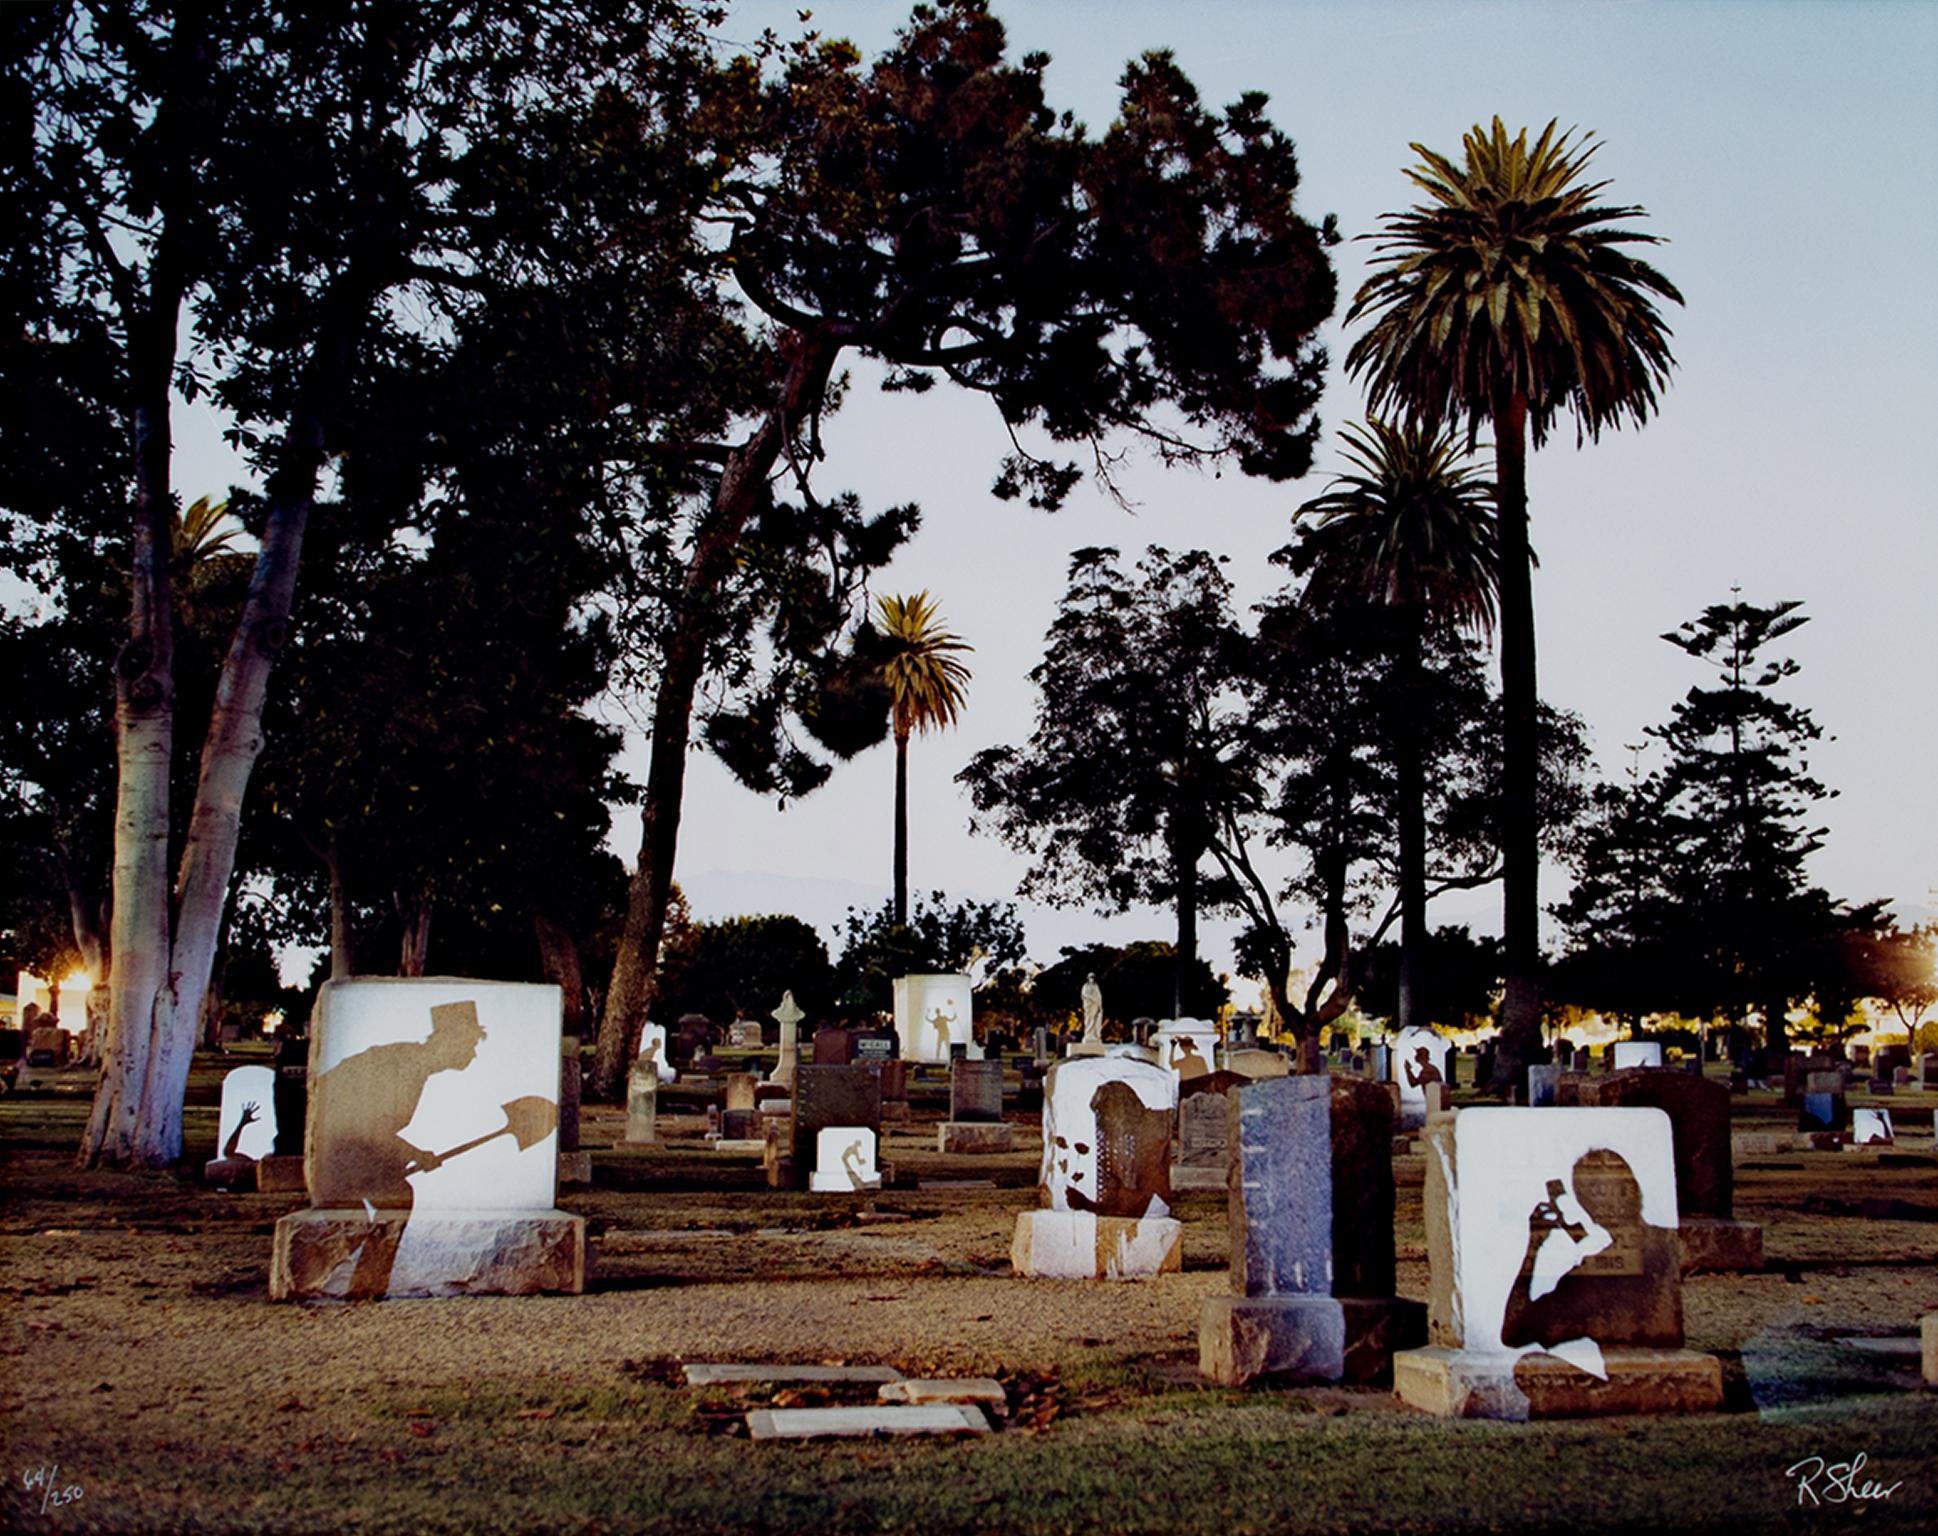 "Graveyard Spirits" is an original fine-art performance photograph by Robert Kawika Sheer. This piece is signed in the lower right and editioned in the lower left. Edition: 64/250. This playful piece depicts a graveyard in the early morning light.